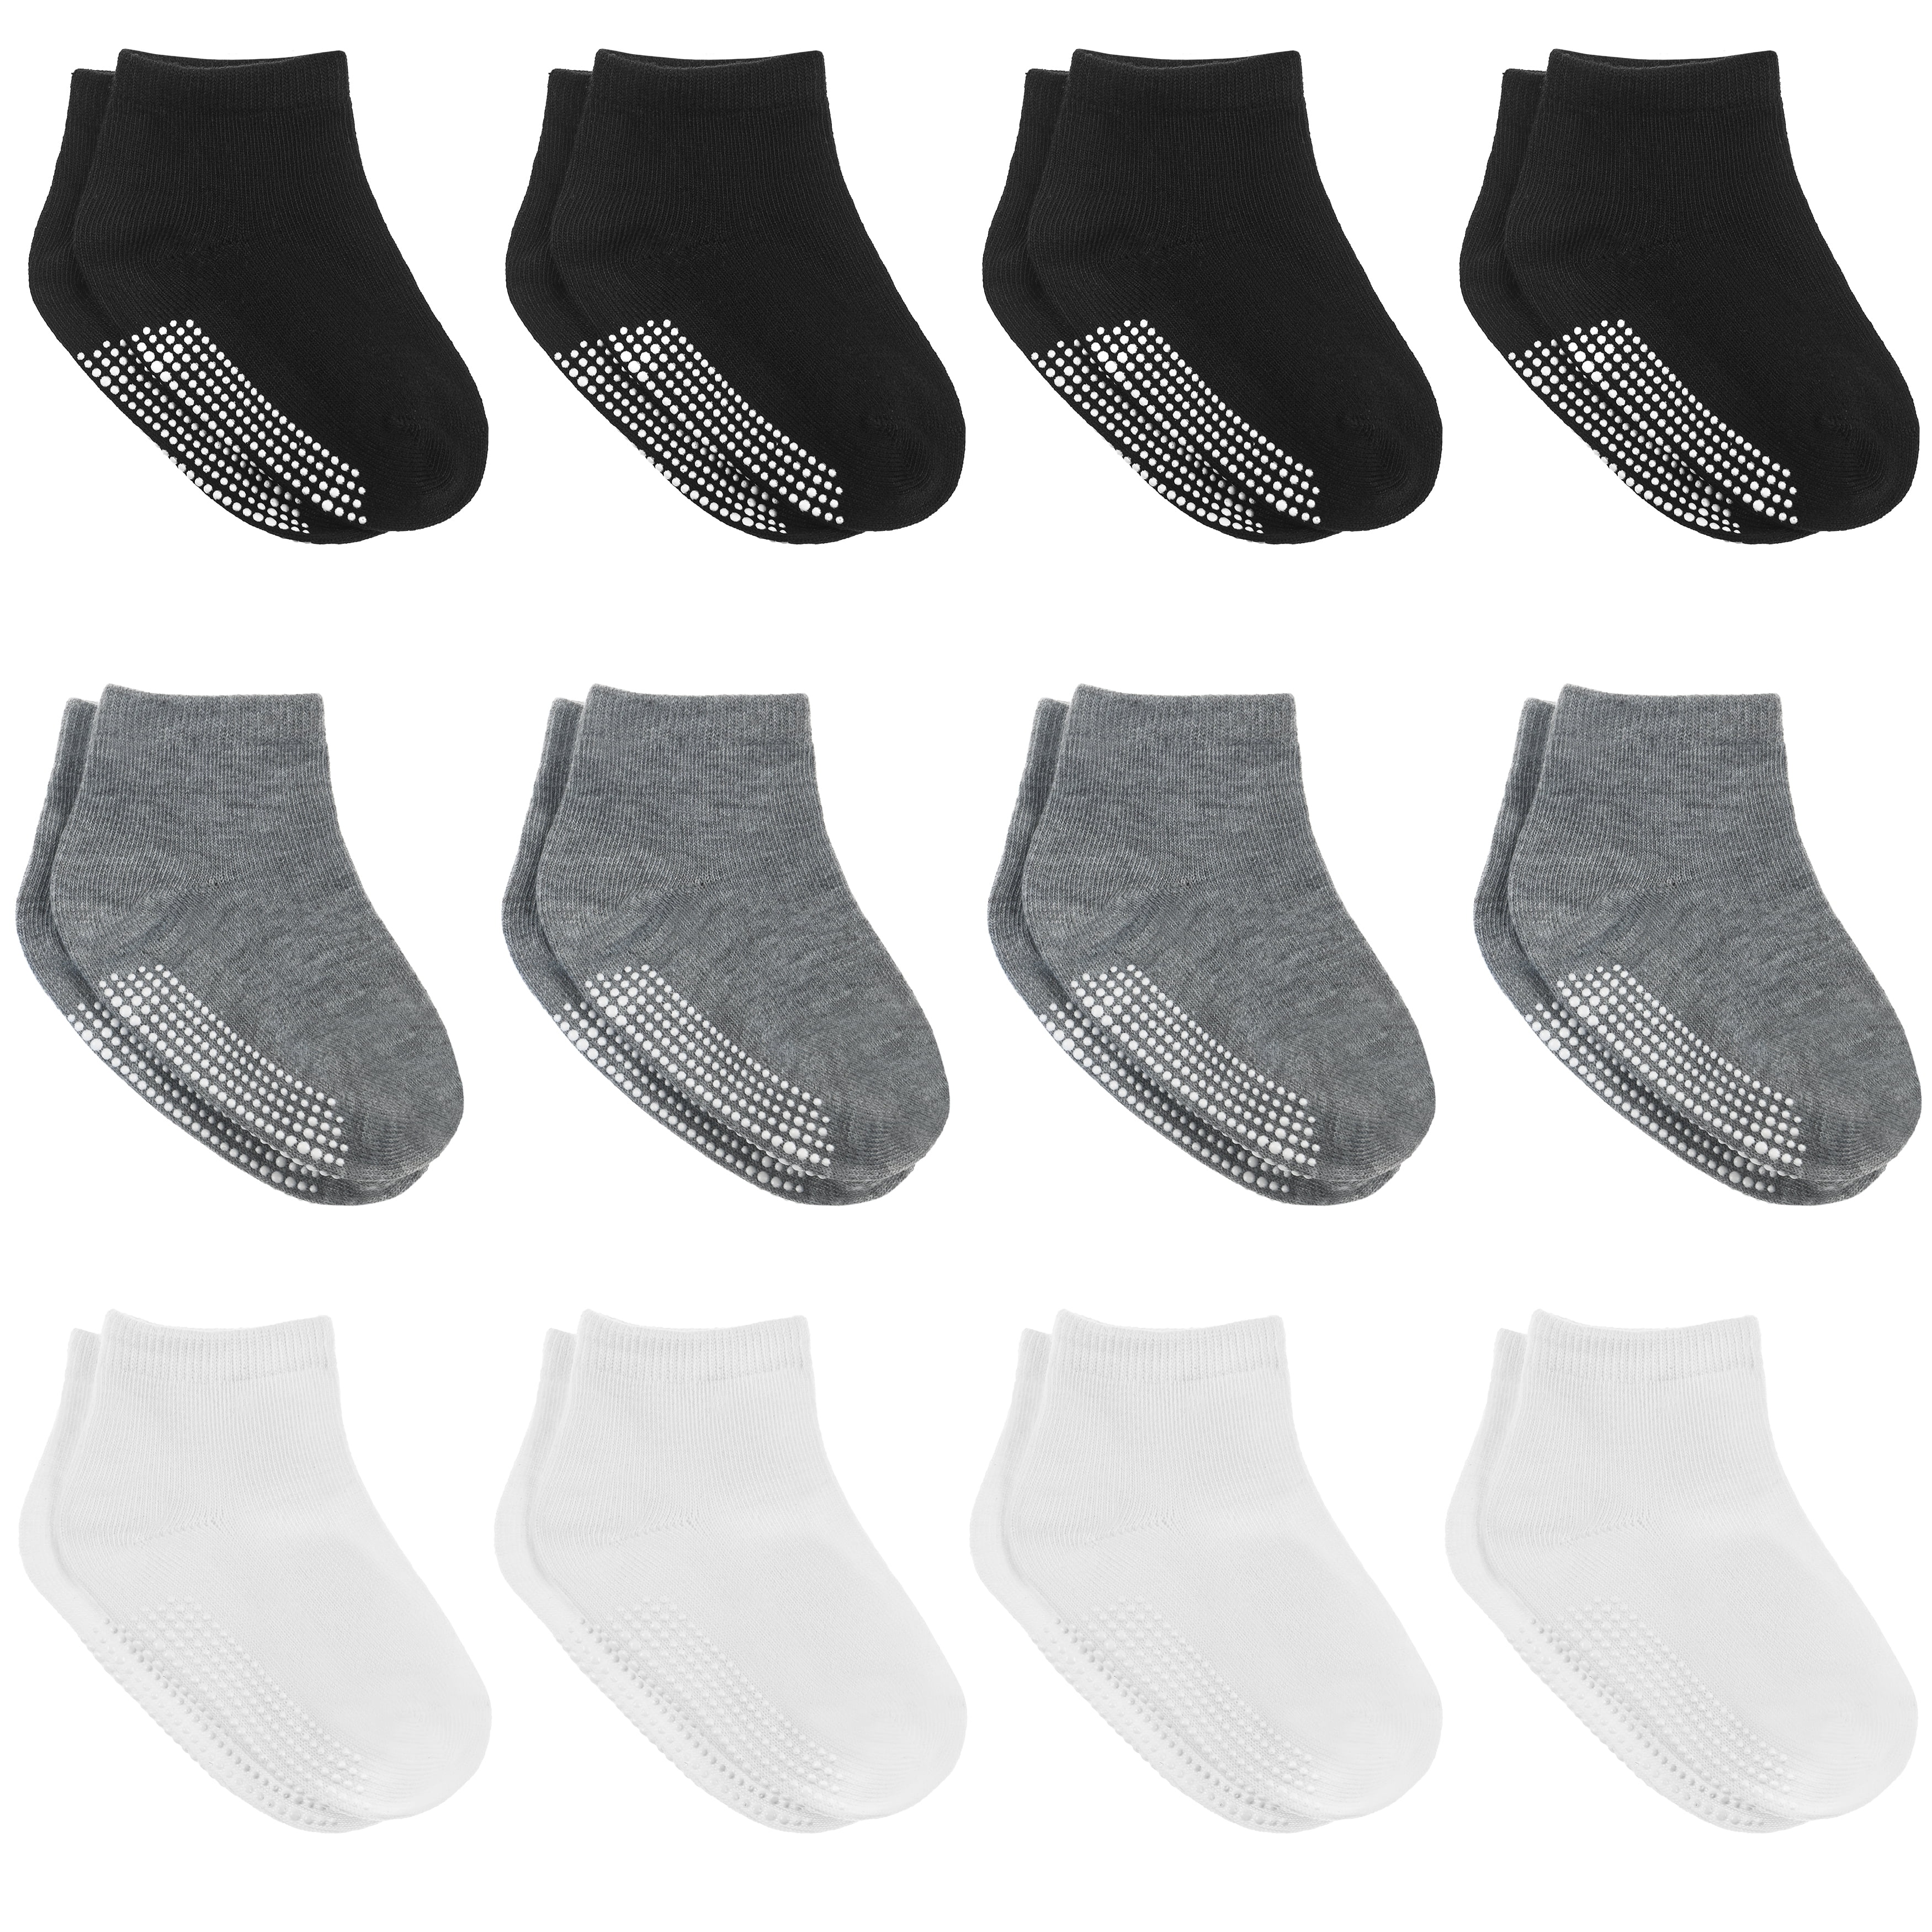 Baby Boys ABS Anti Non Slip Cotton Socks 2 Pairs Size 18 months to 7 years 